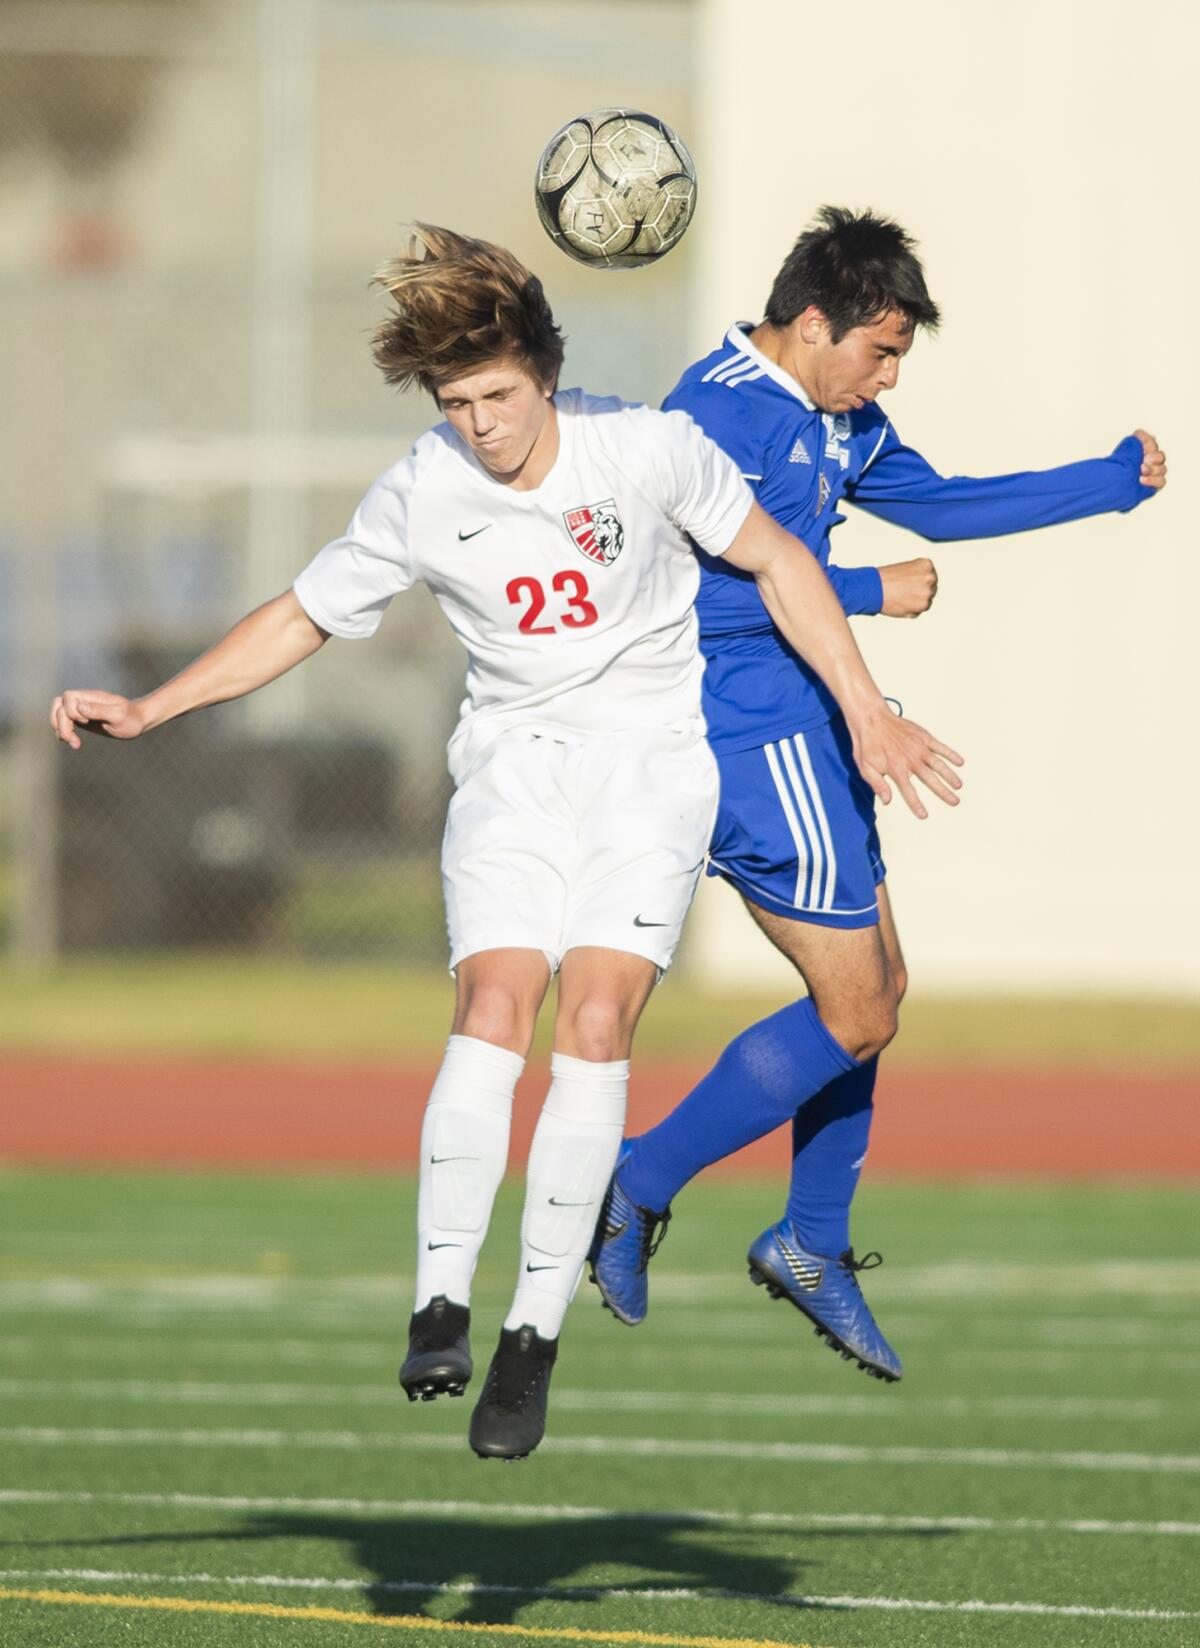 Fountain Valley's Chris Ouellette, right, goes up for a header against Mater Dei's Tae Ulicny in the first round of the CIF Southern Section Division 1 playoffs on Wednesday.